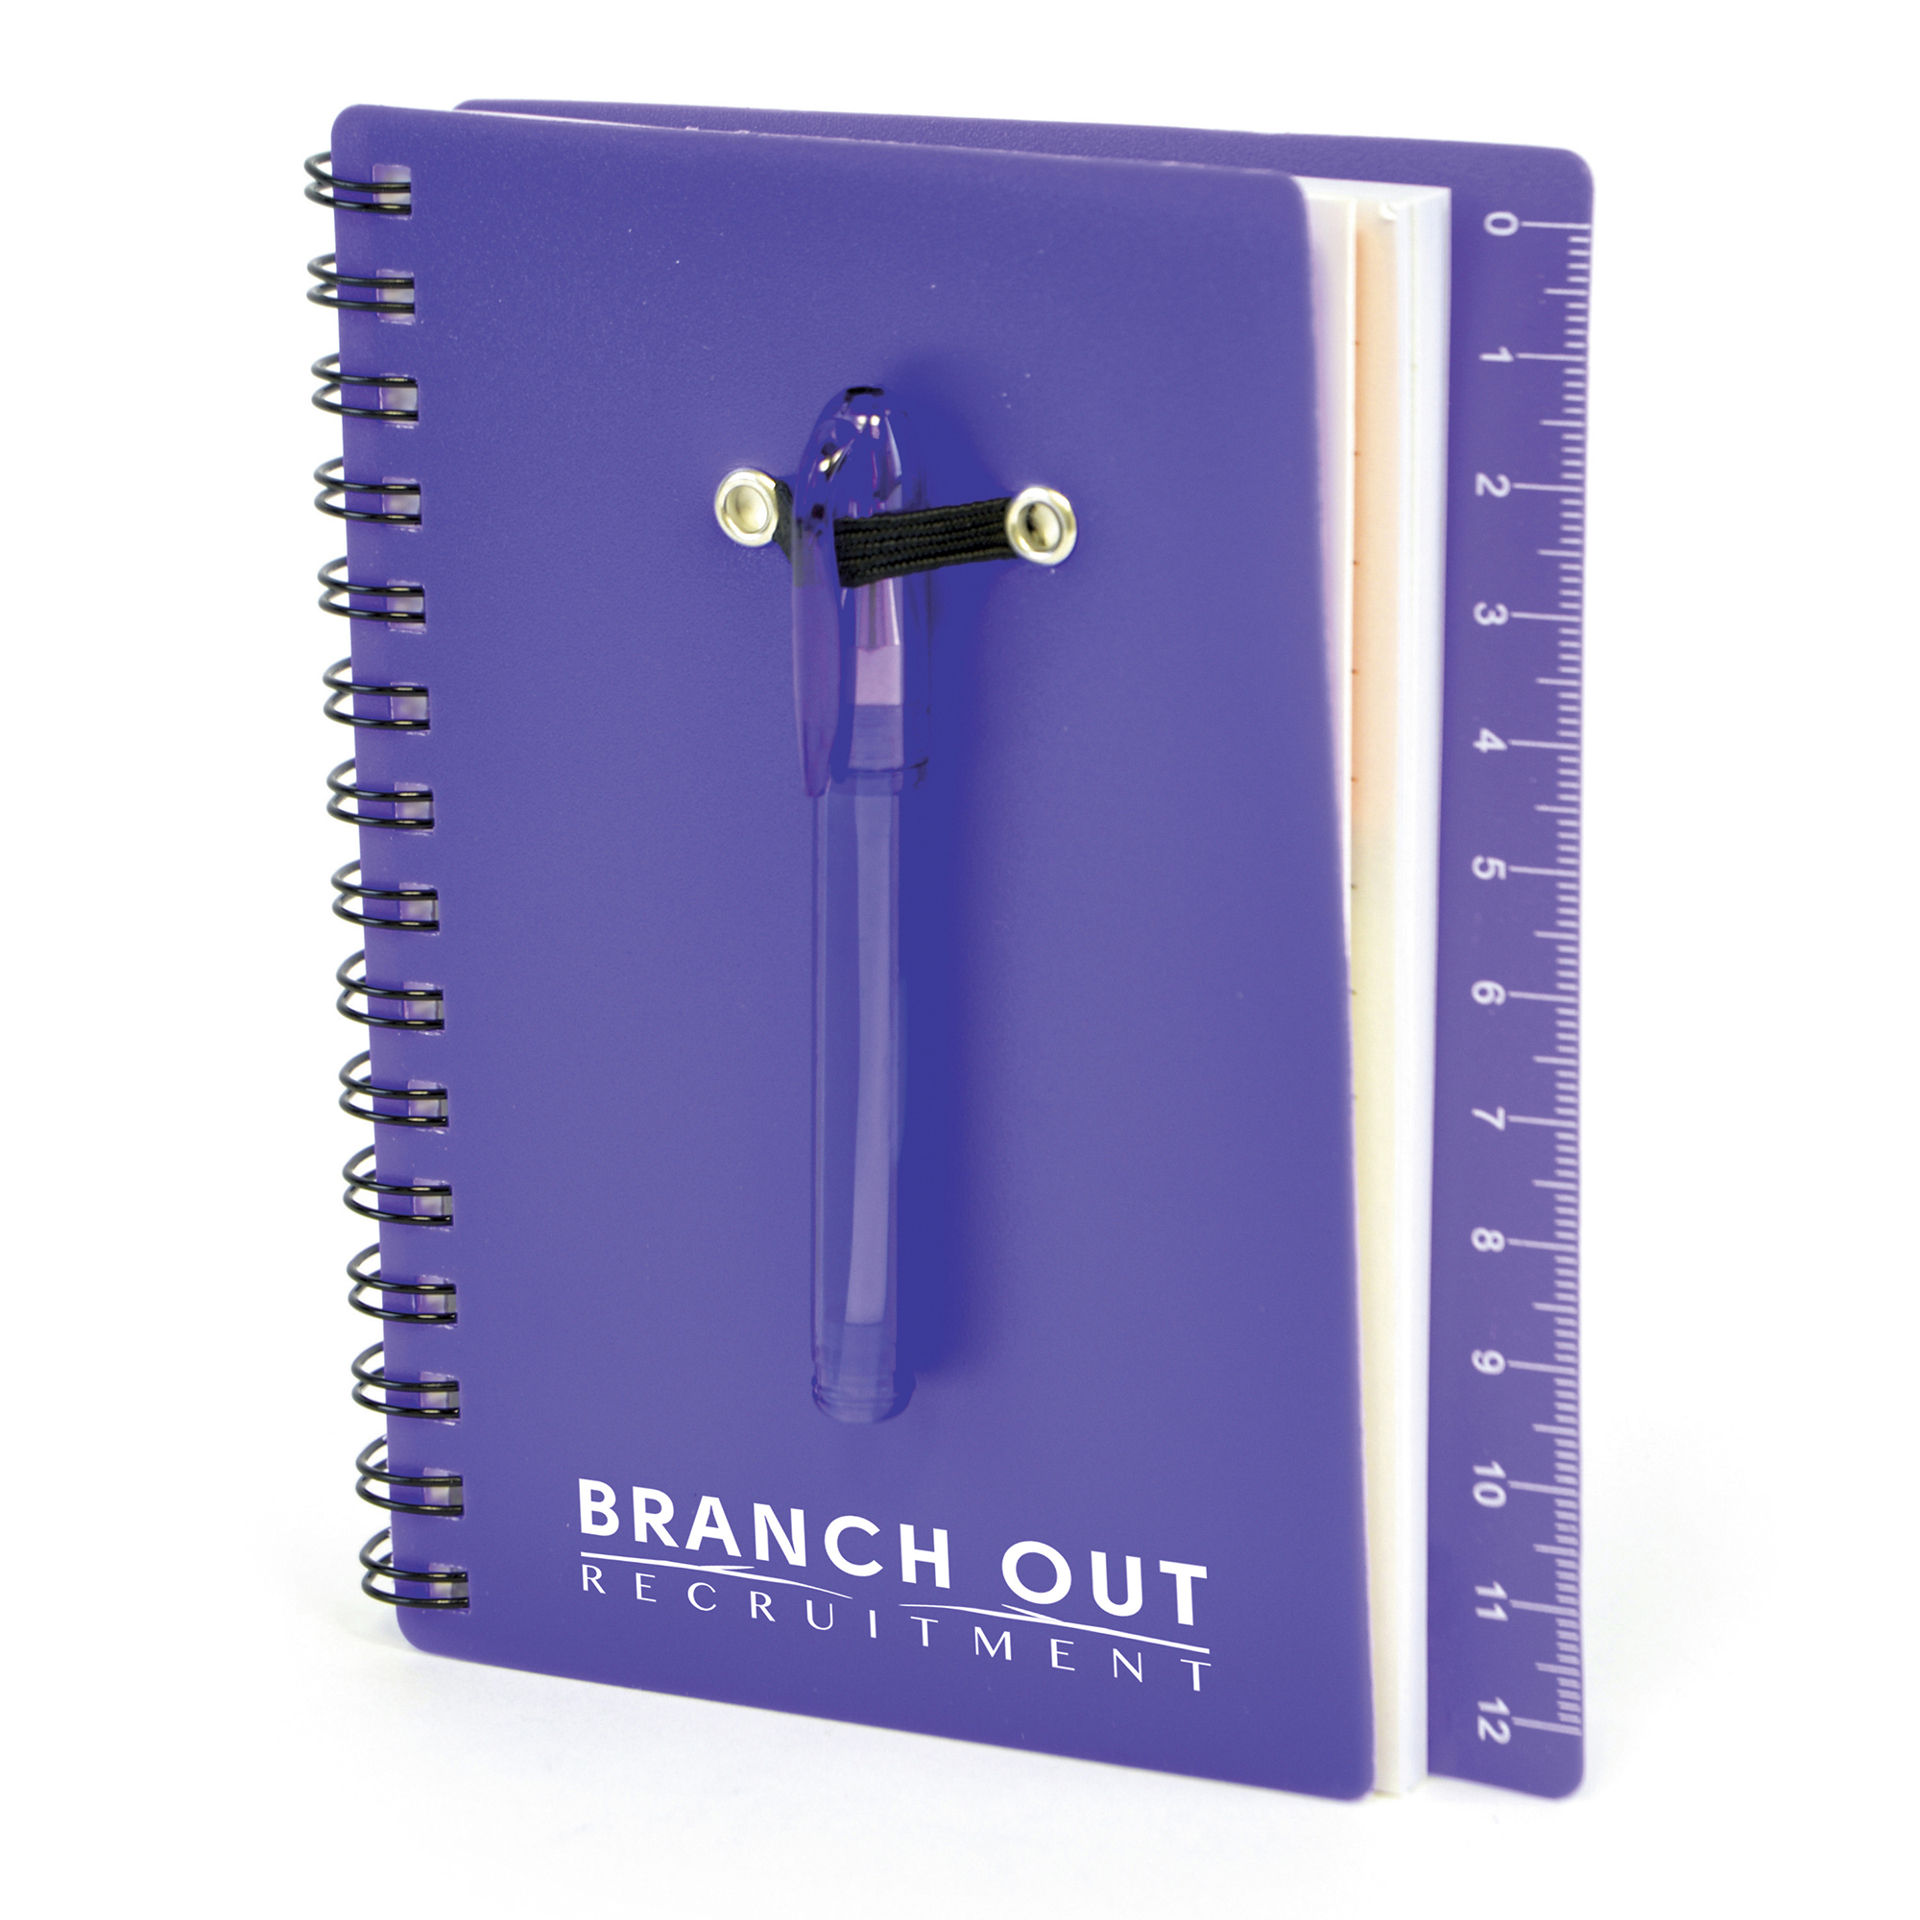 Spiral bound flexible purple plastic covered notebook with matching ball pen with back cover ruler